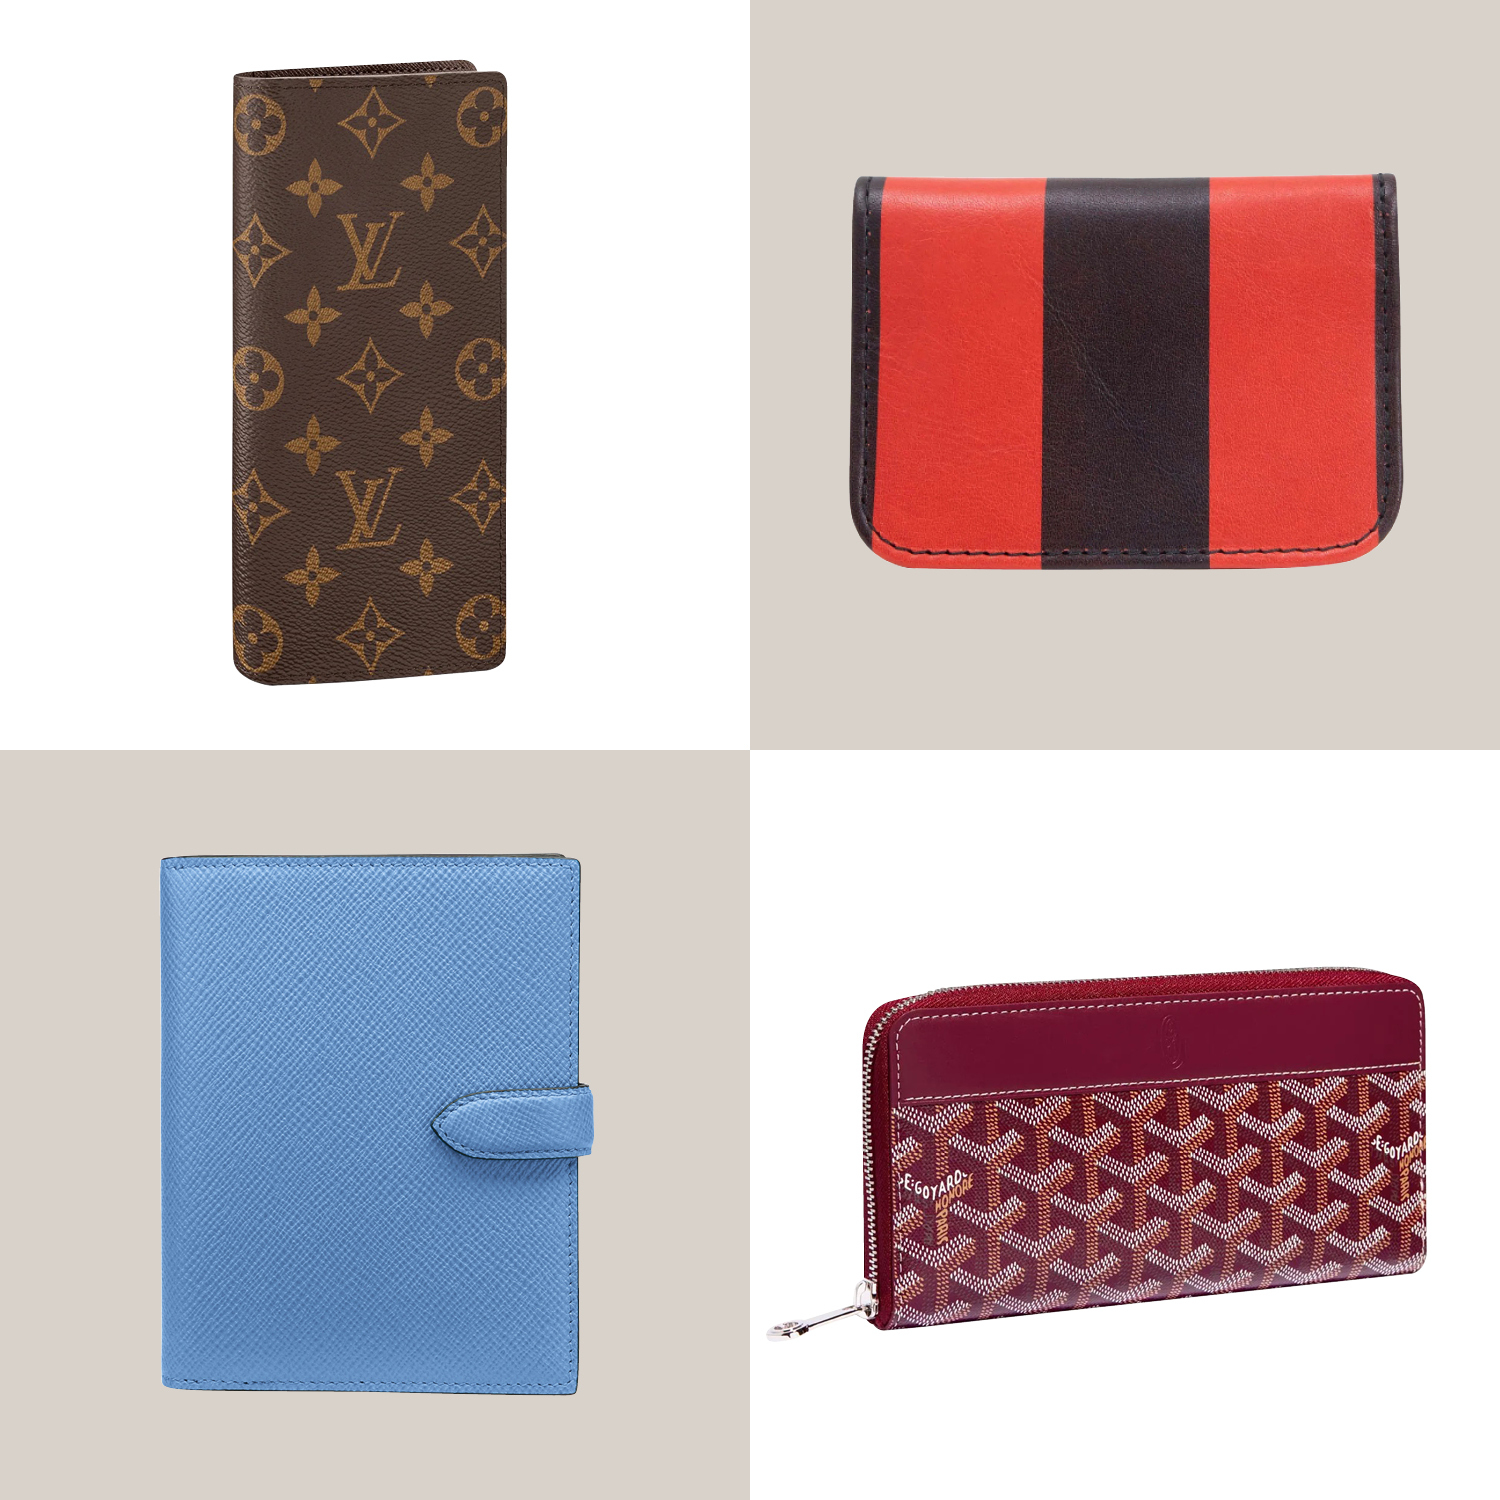 Designers and Tastemakers Share Their Favorite Wallets – Frederic